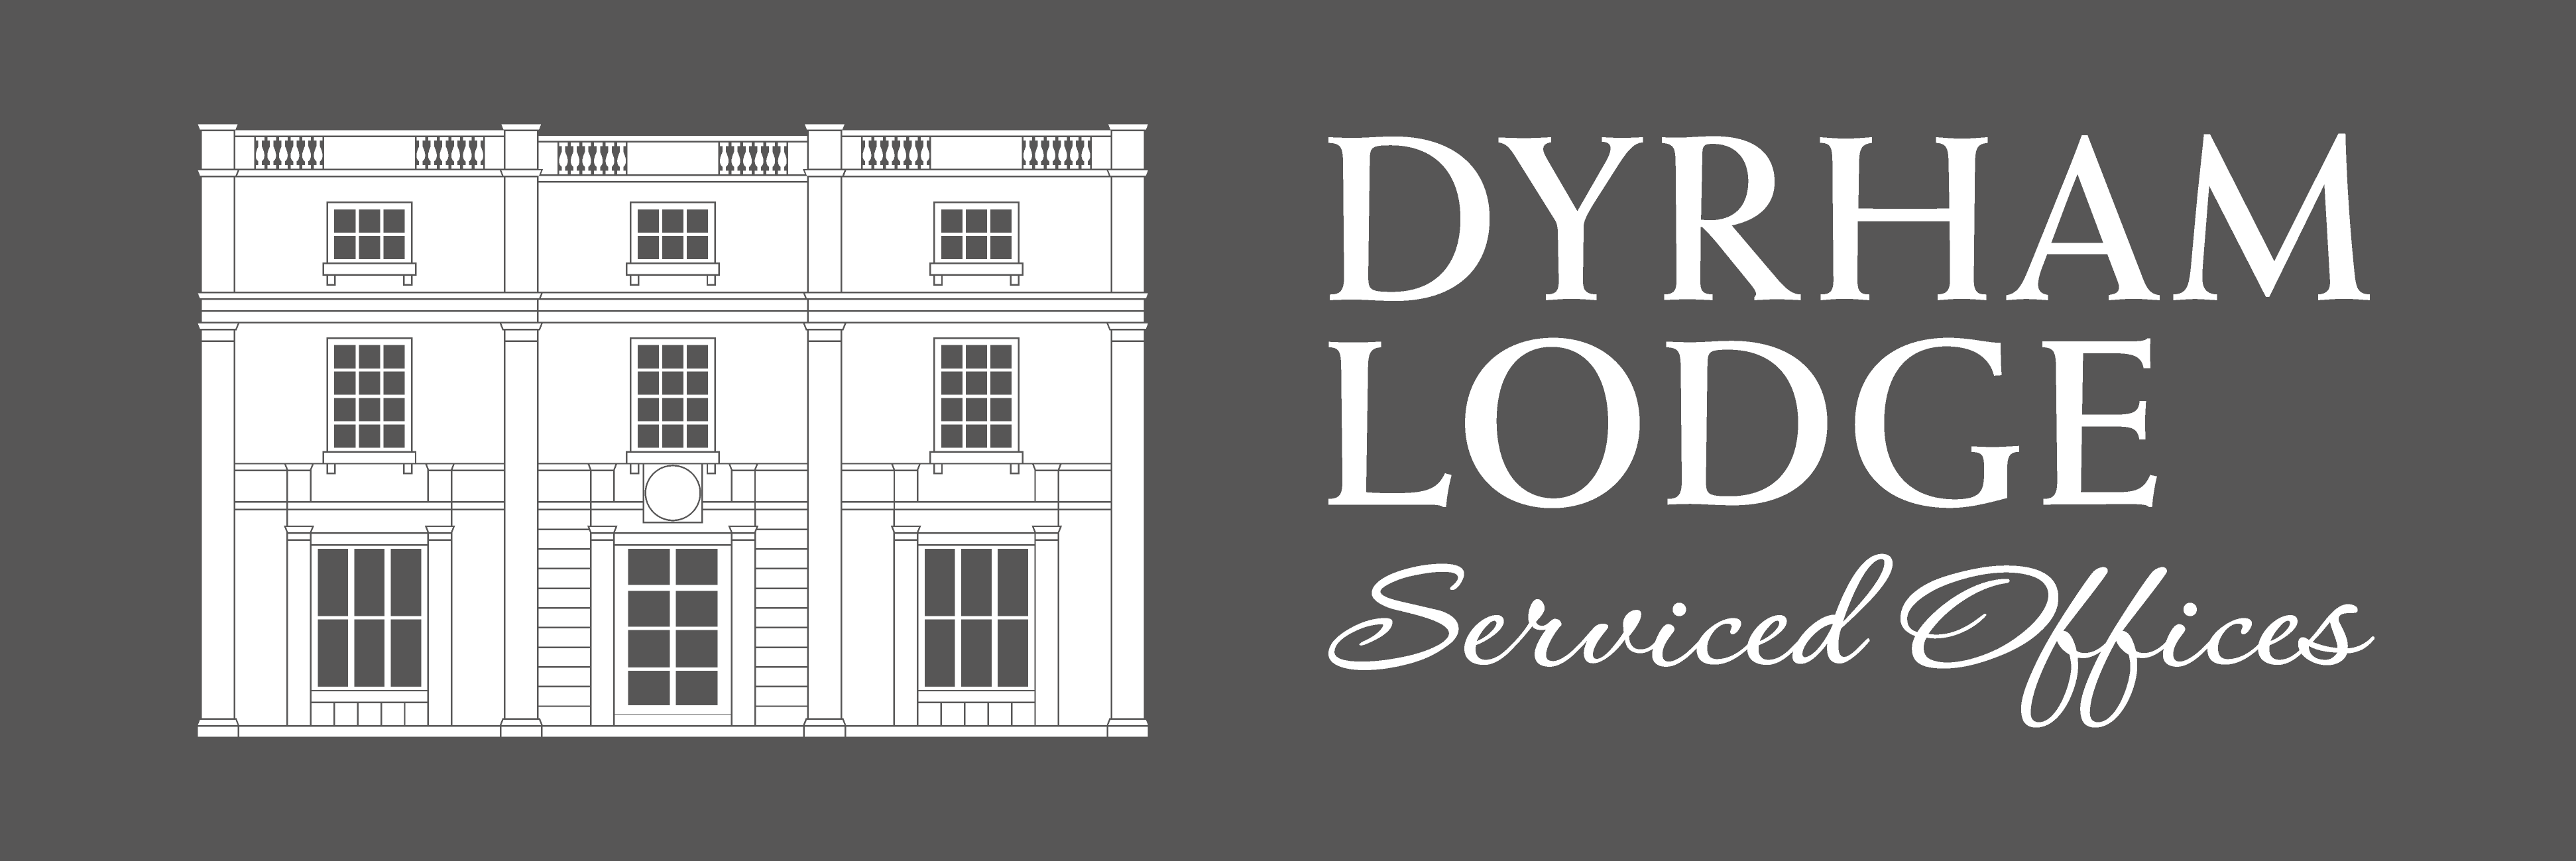 Dyrham Lodge Serviced Office Spaces